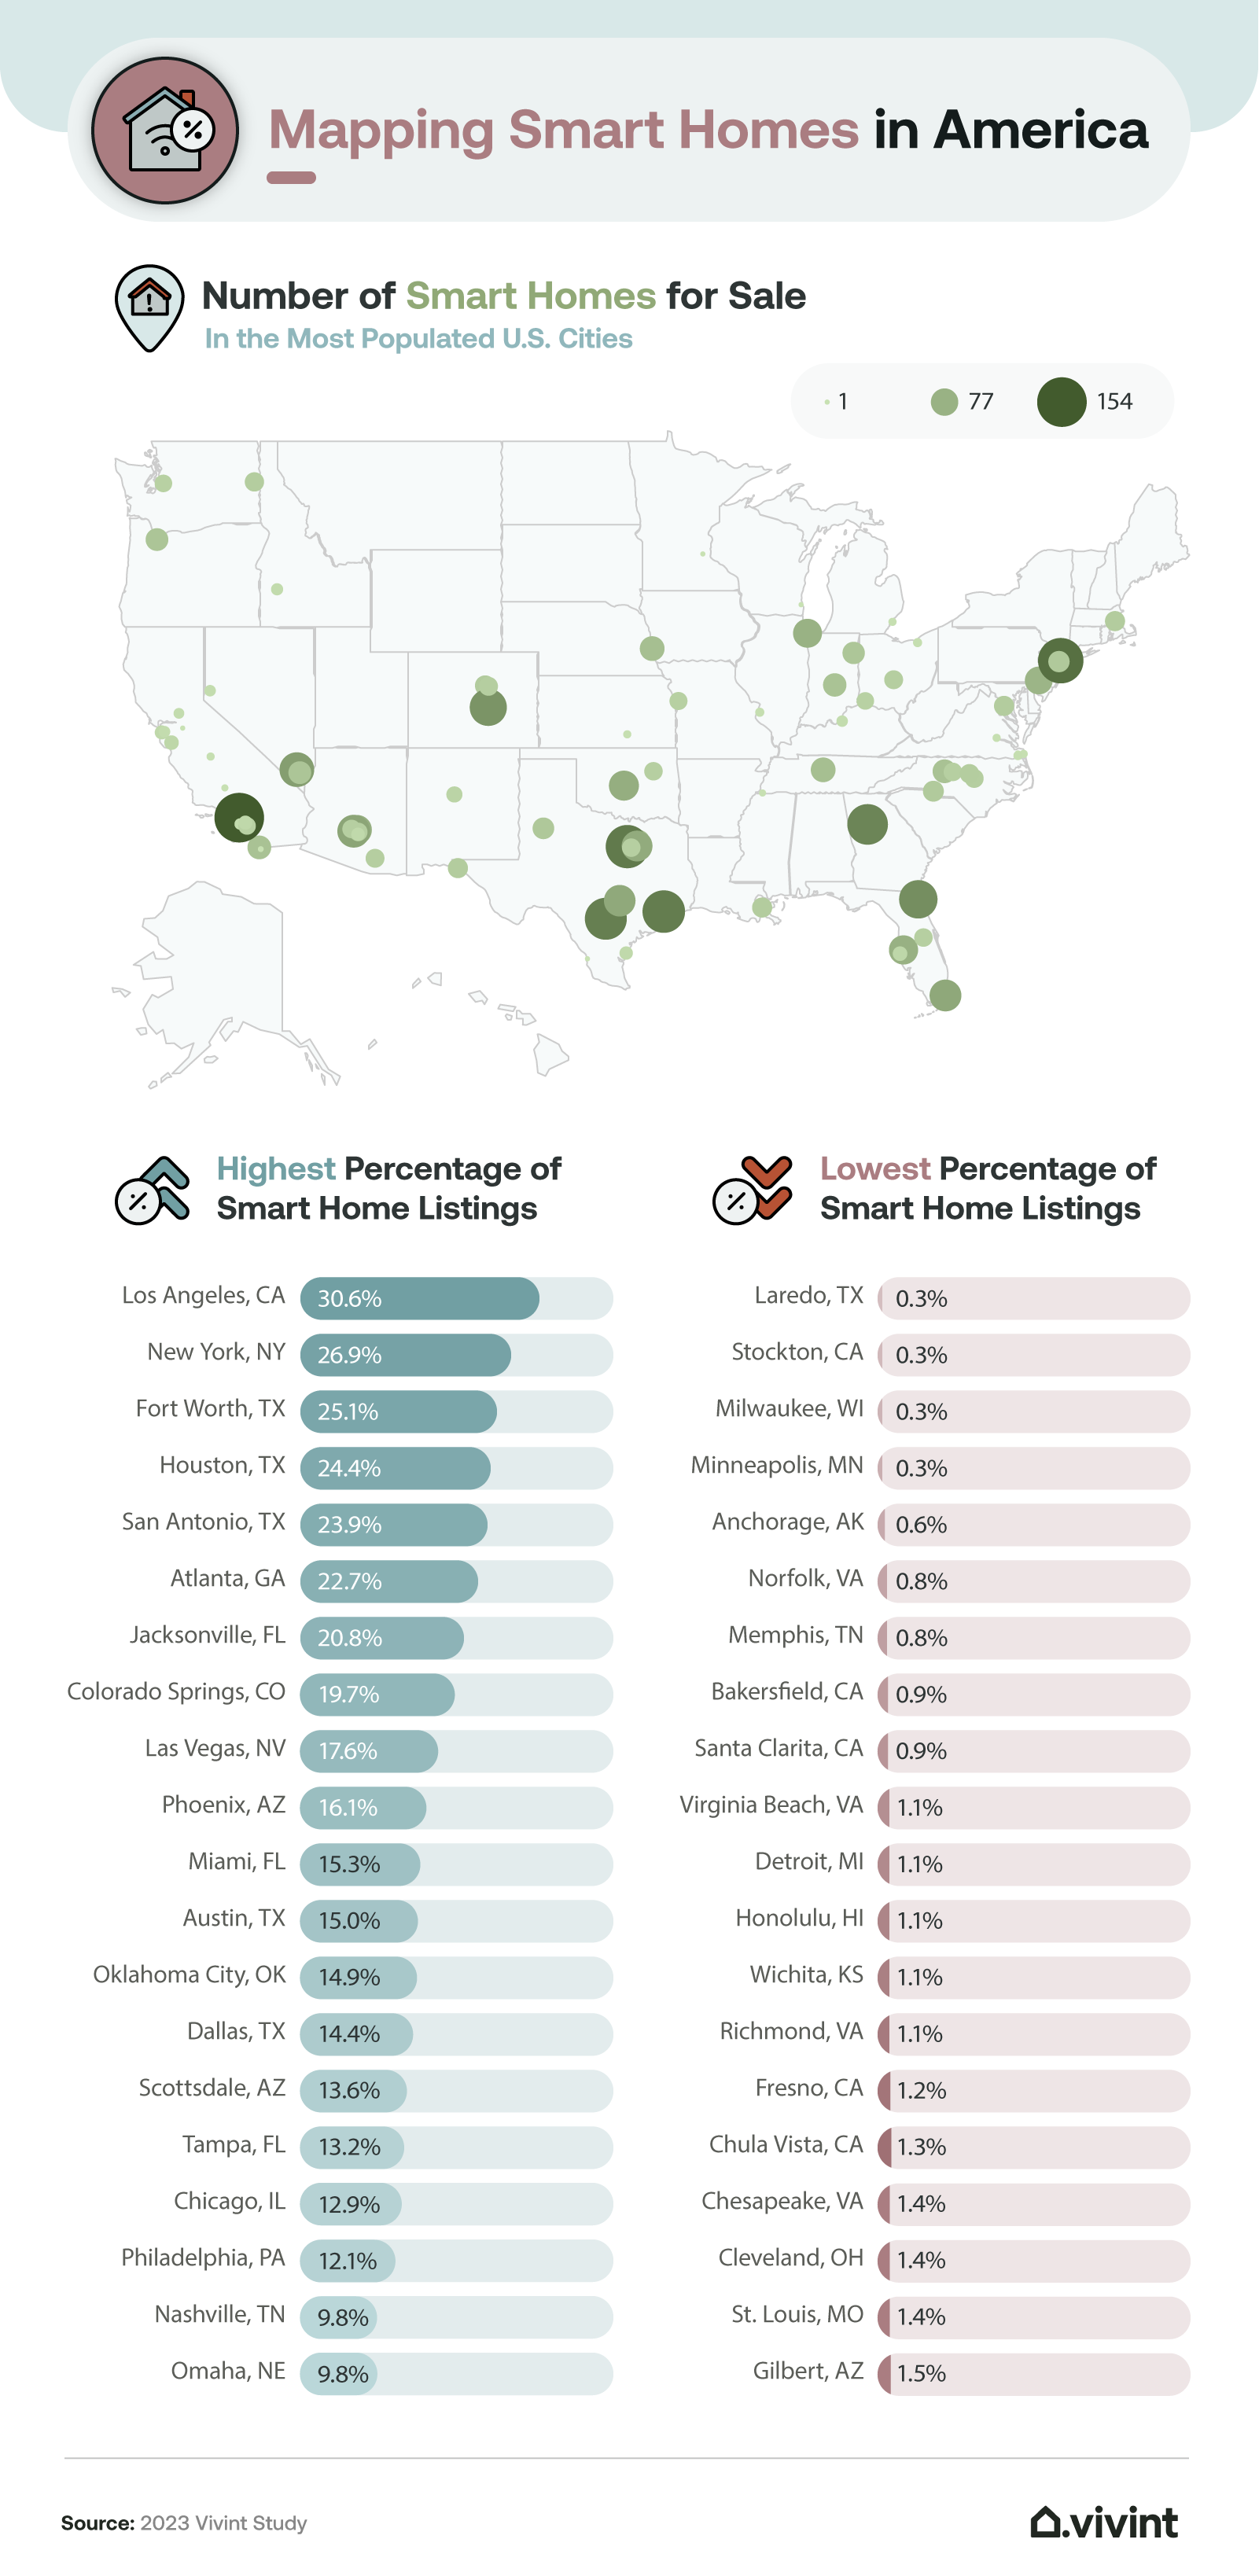 Information about where in the United States there are the most smart homes for sale.